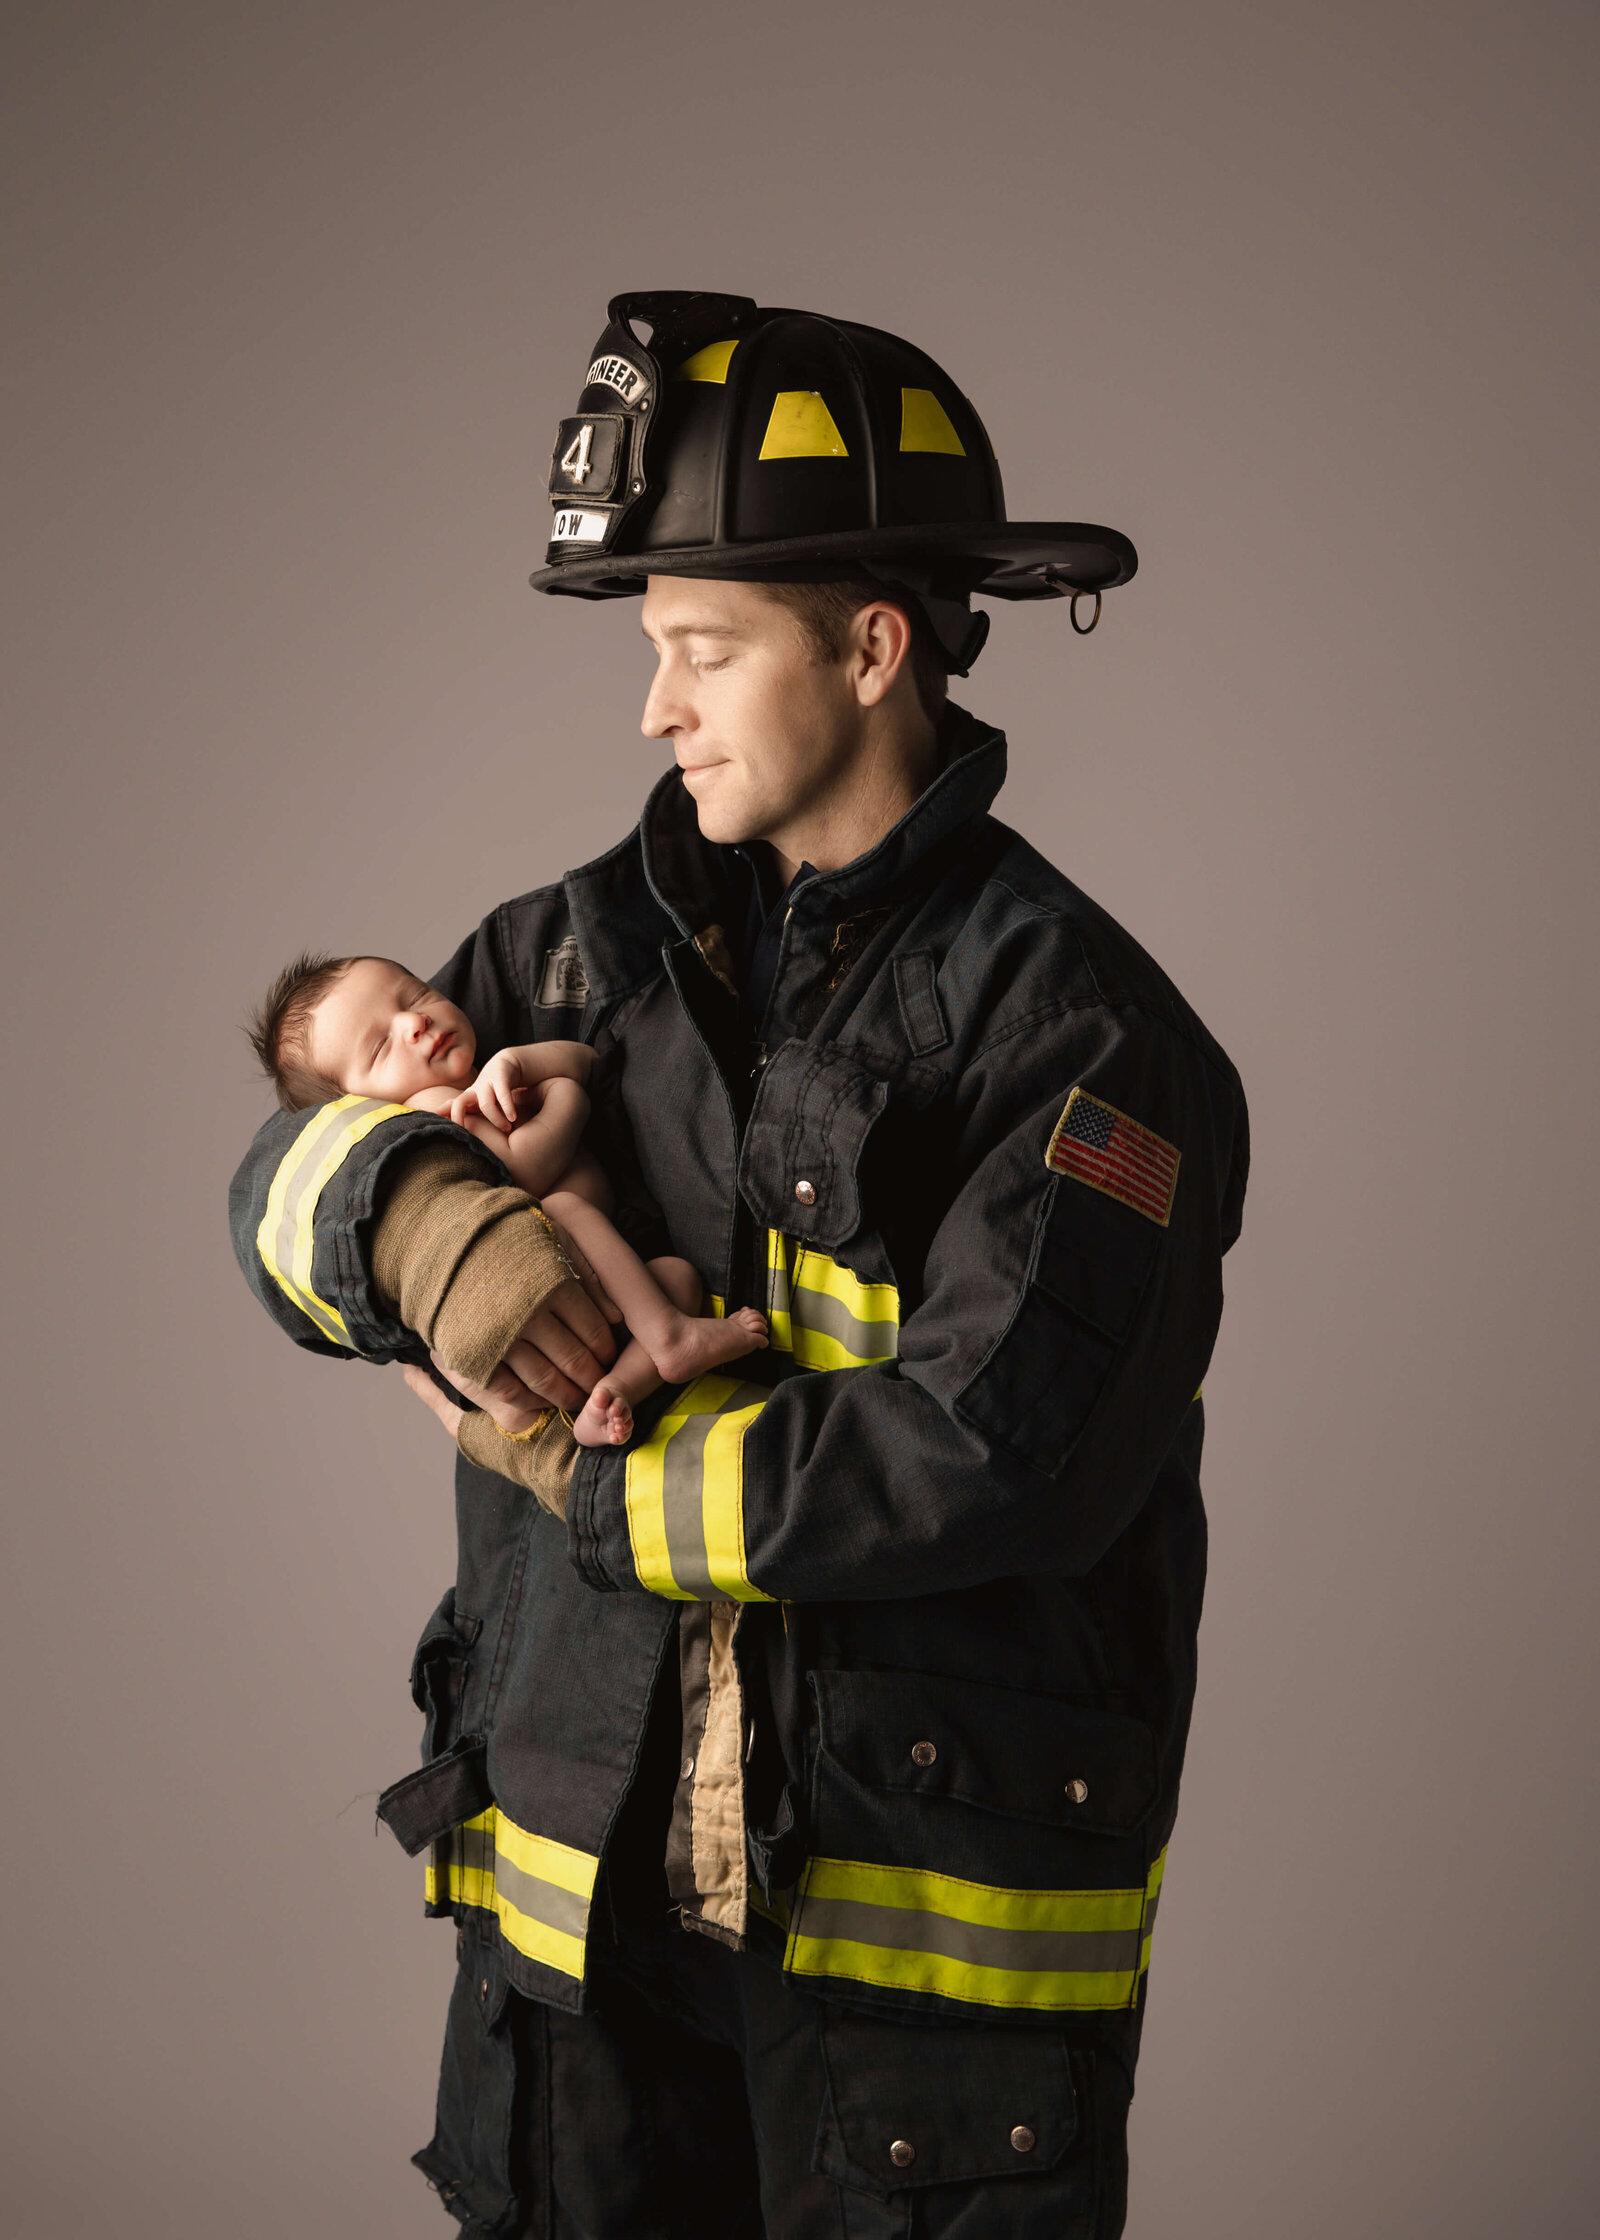 Dad wearing his firefighter uniform holding his new baby in studio session by Ashley Nicole Photography